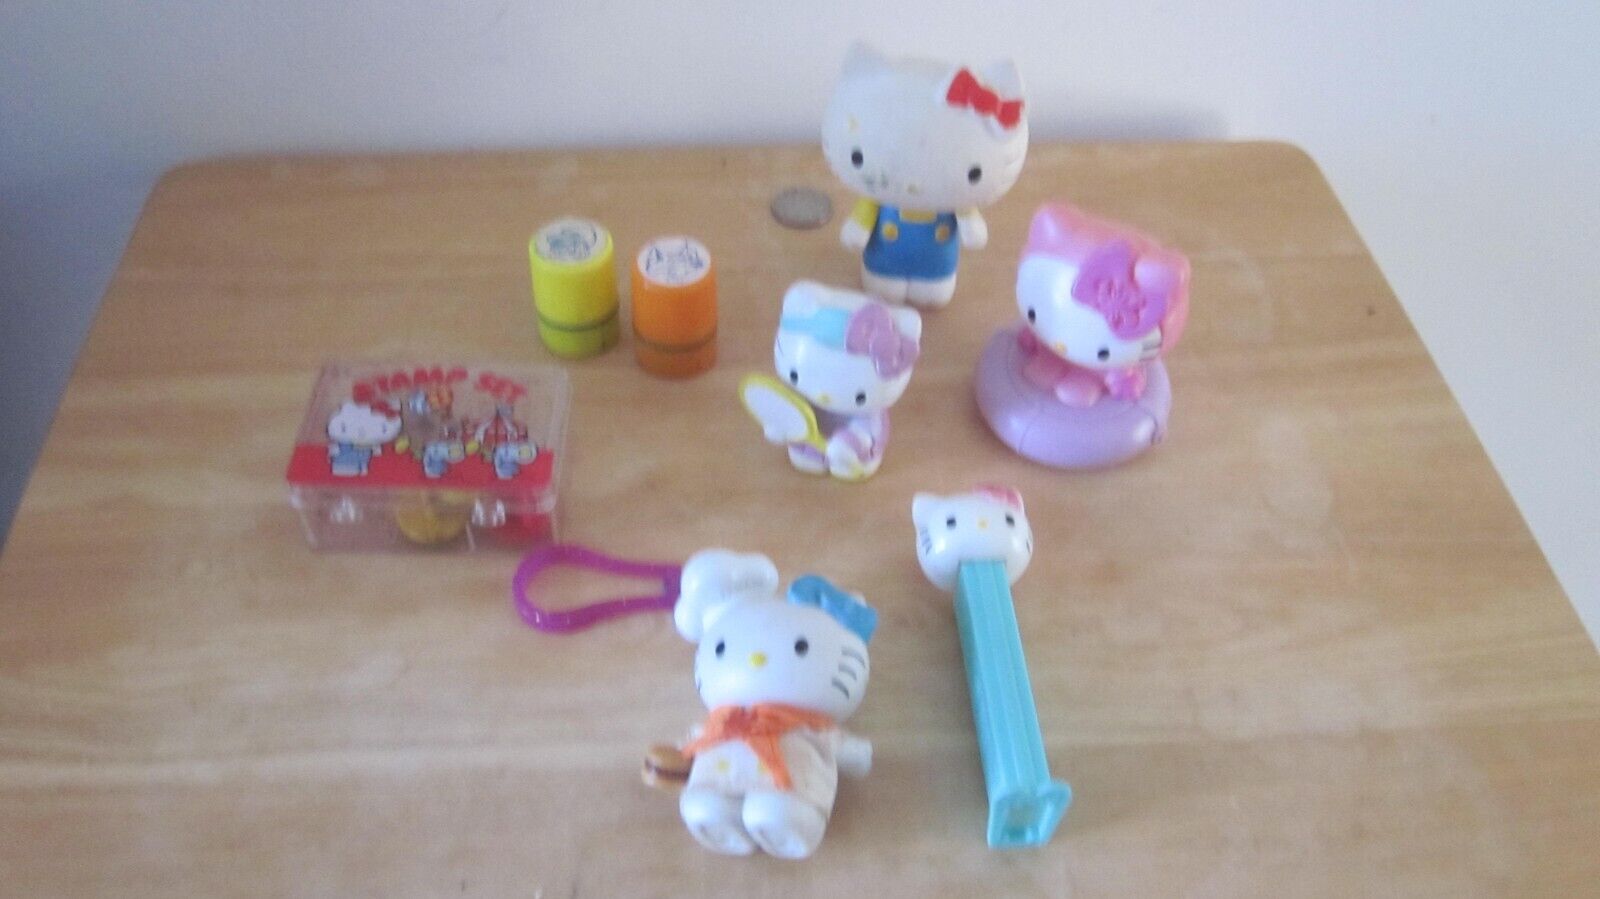 Vintage Junk Lot Hello Kitty Items, Key Chain, Figures, Stamp Set + Smurf Stamp